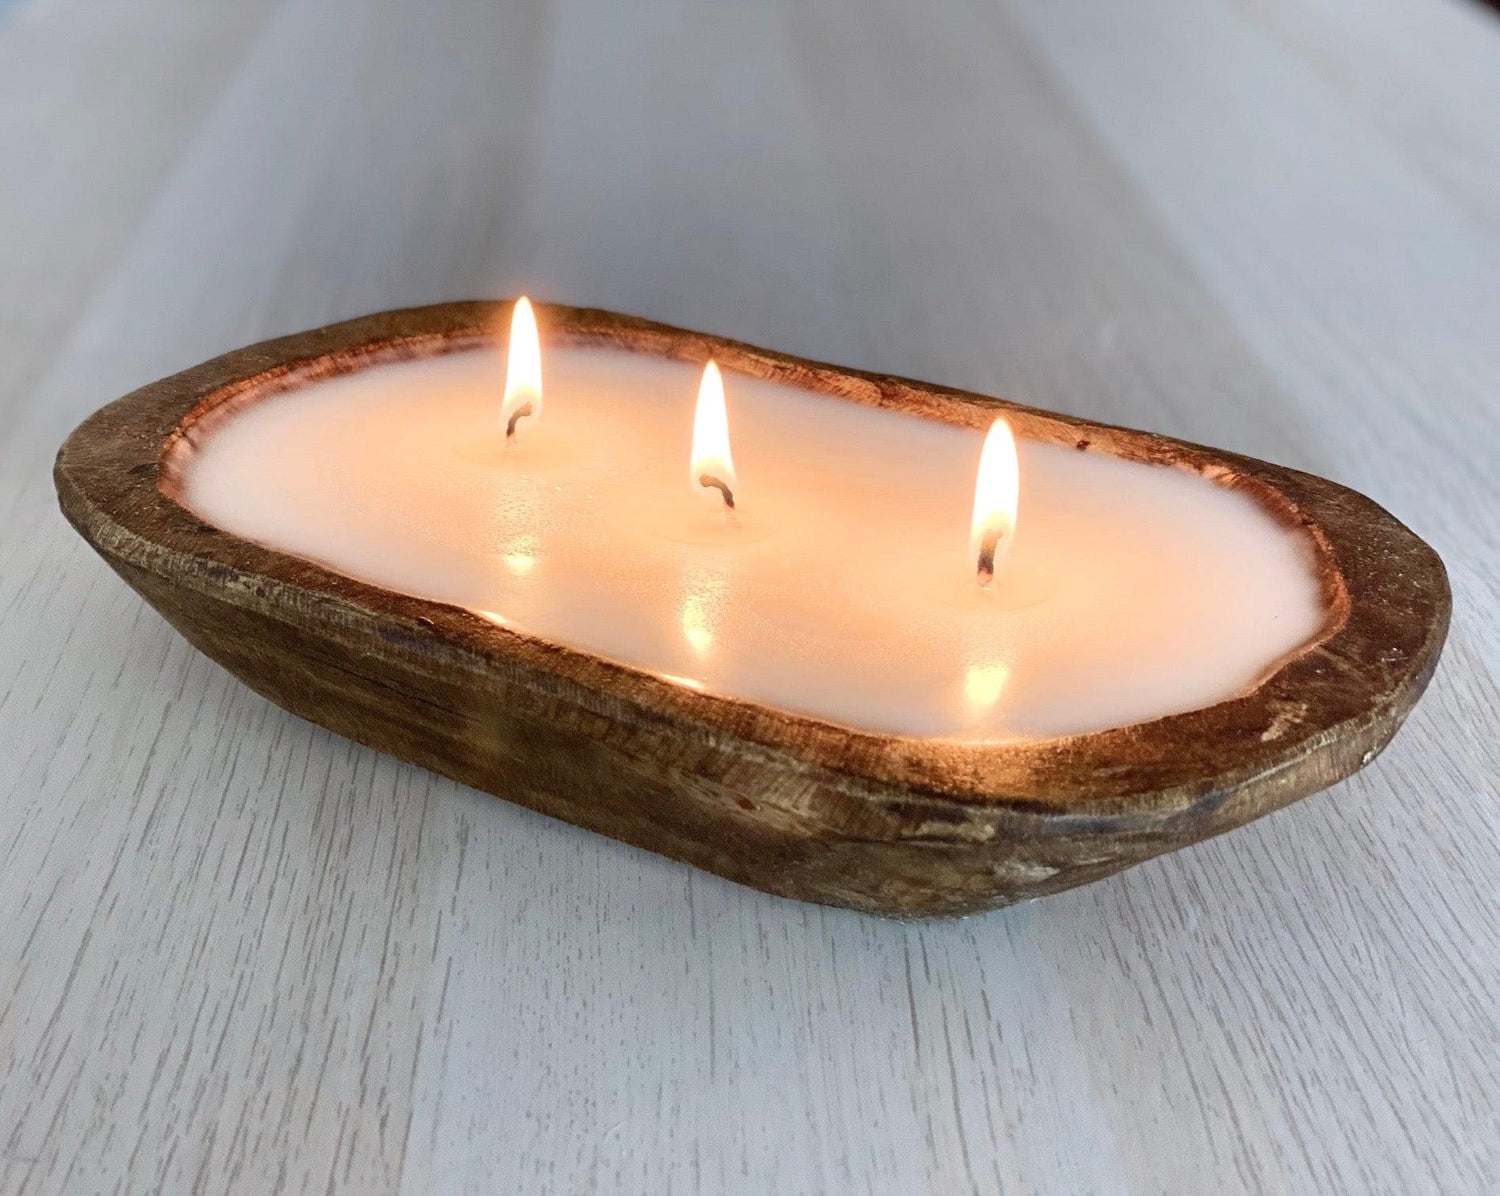 3 Wick Soy Candles in Wood Bowls - Heart of the Home AR